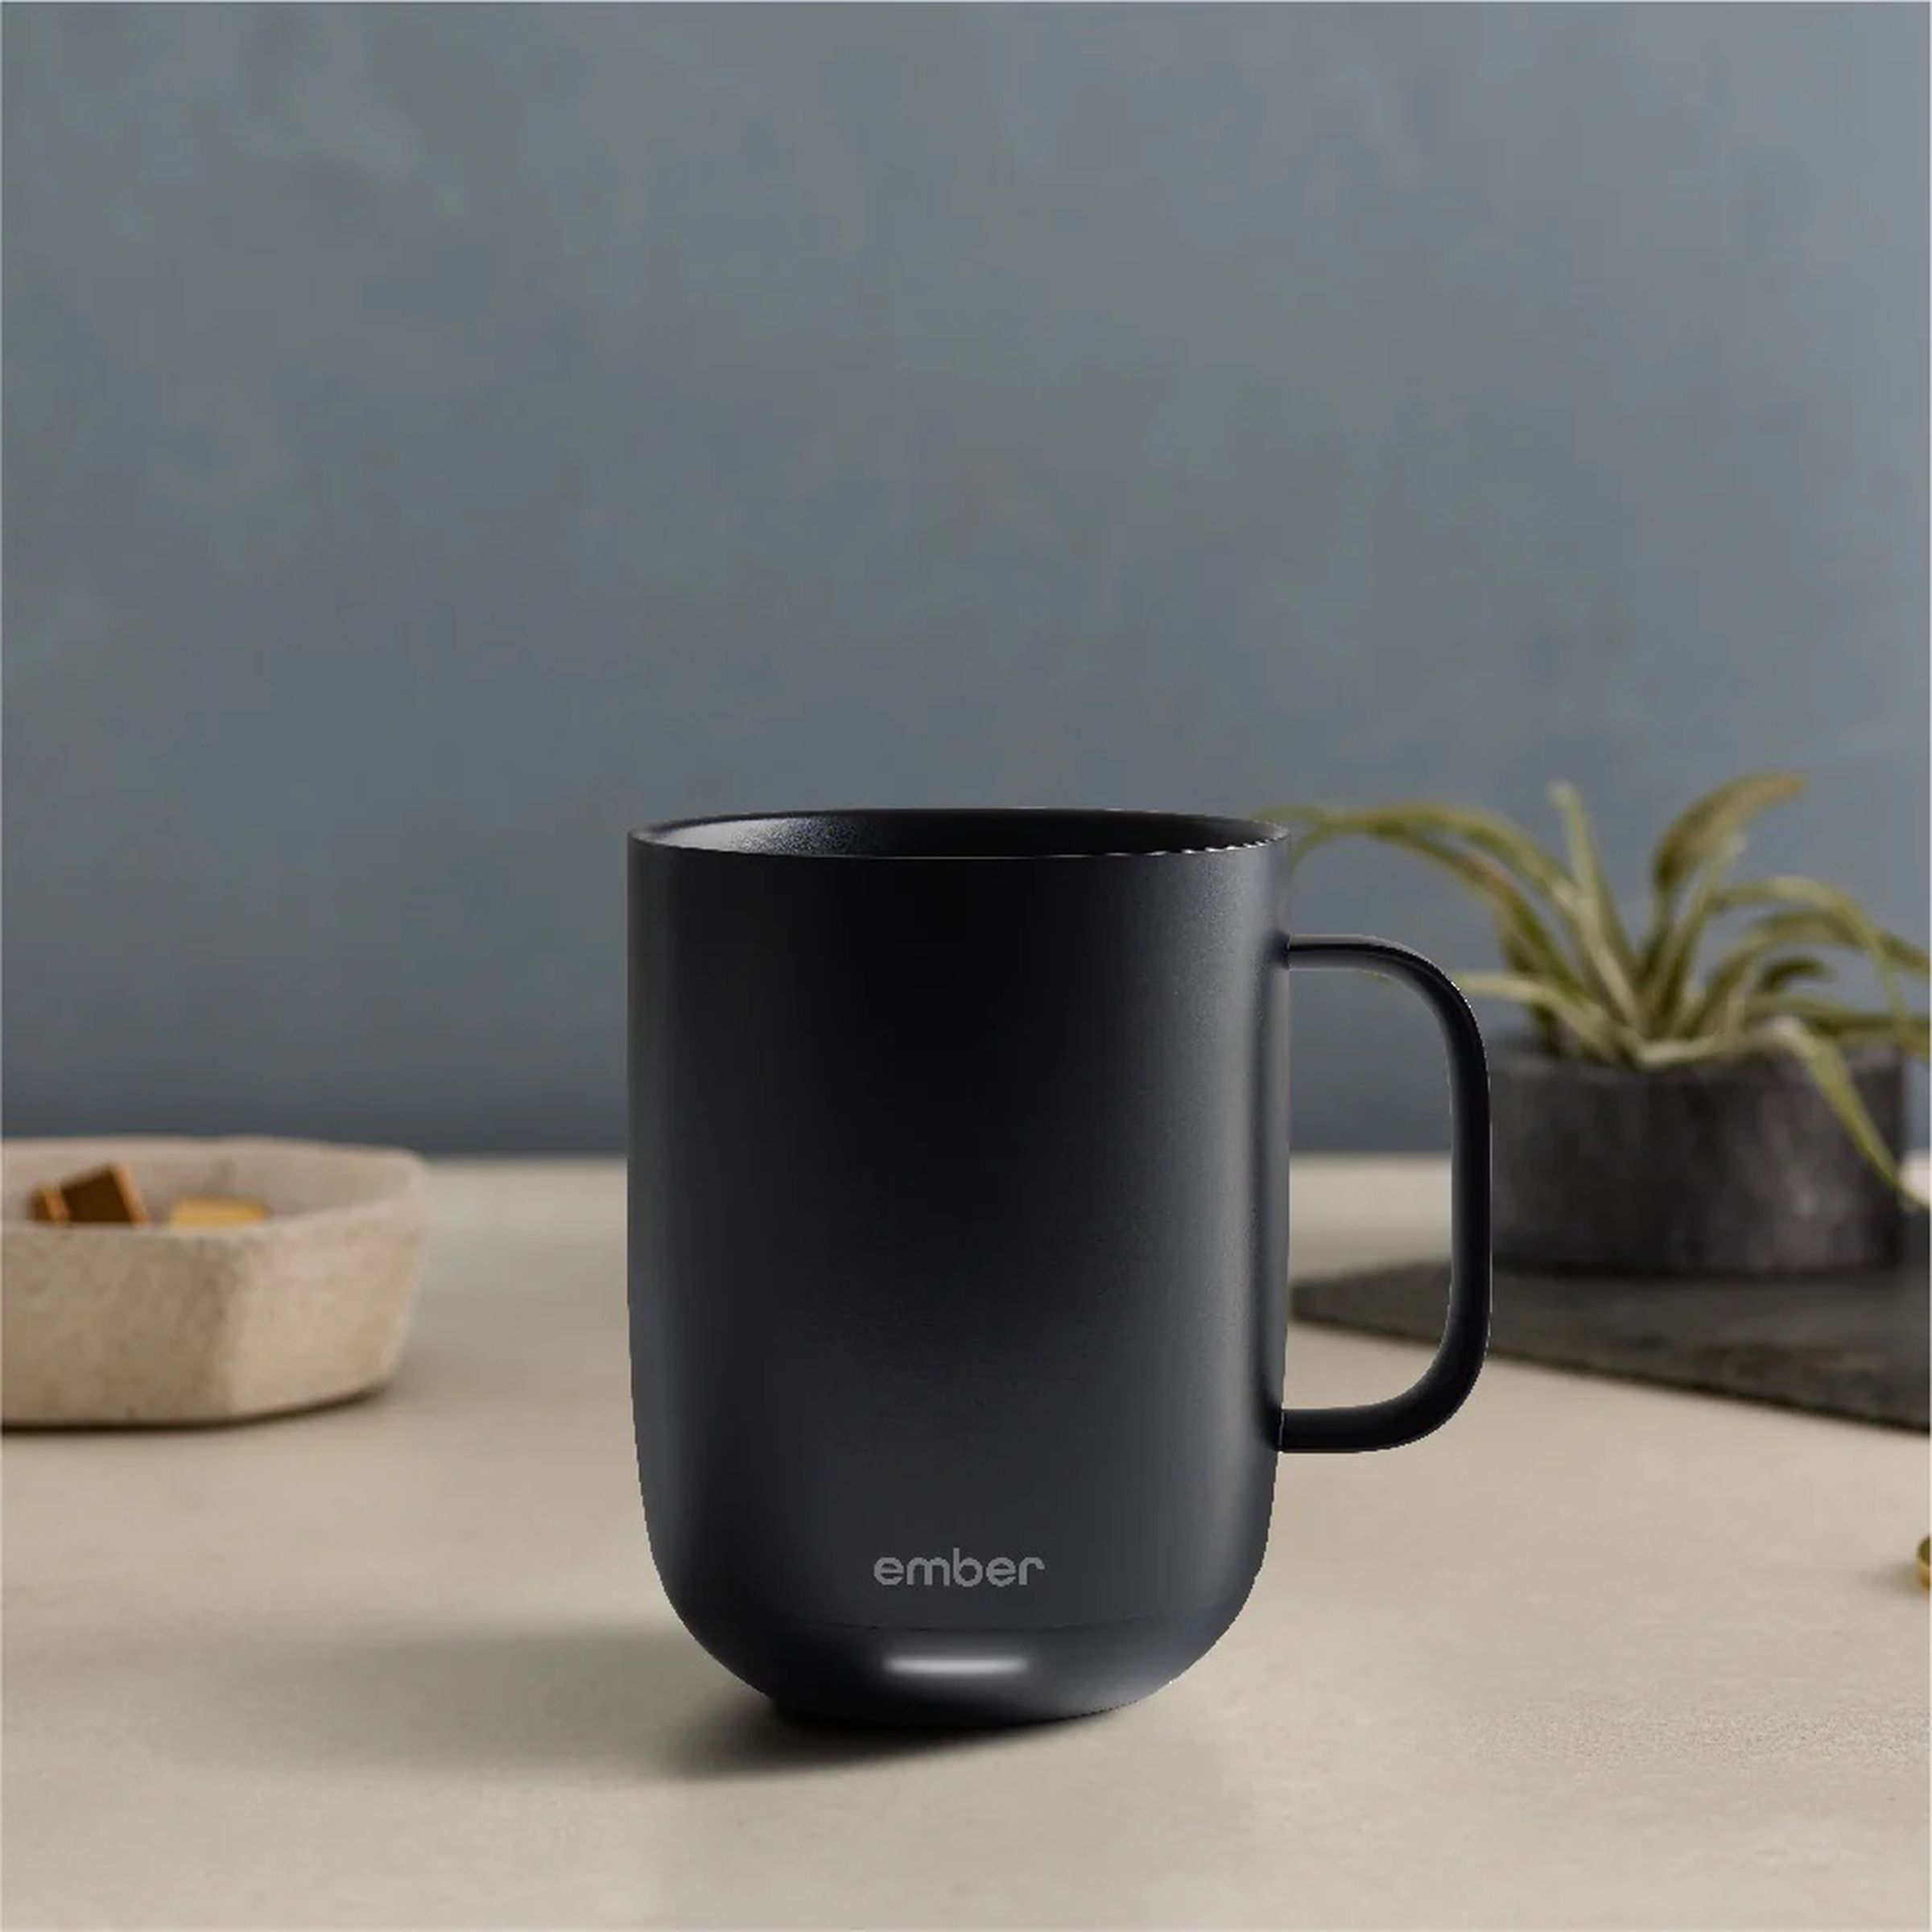 A photo of a black smart mug on a wooden table.